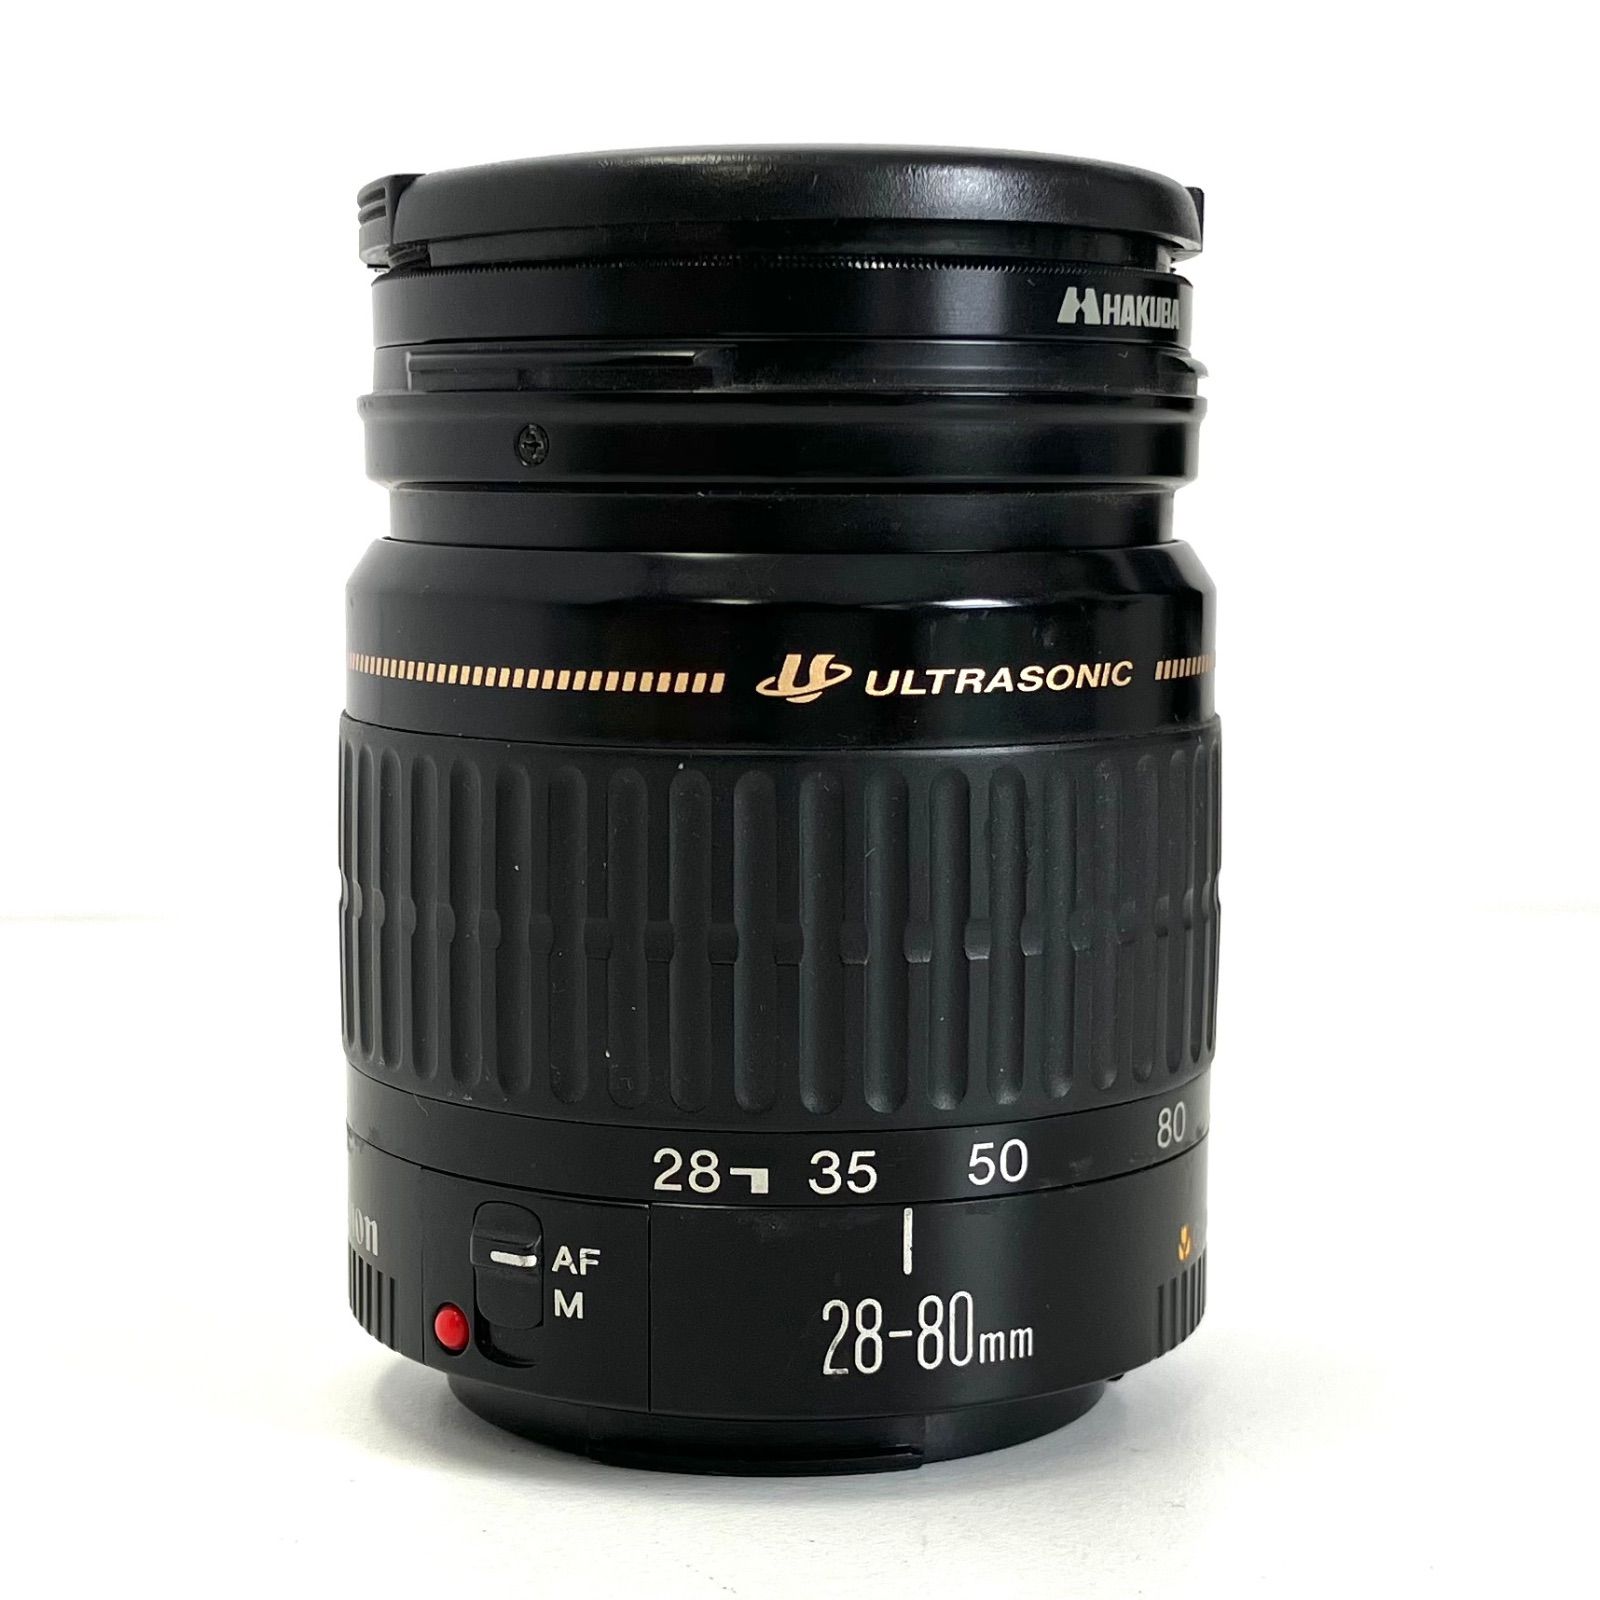 CANON EOS7＆ZOOM LENS EF 28-80mm F3.5-5.6